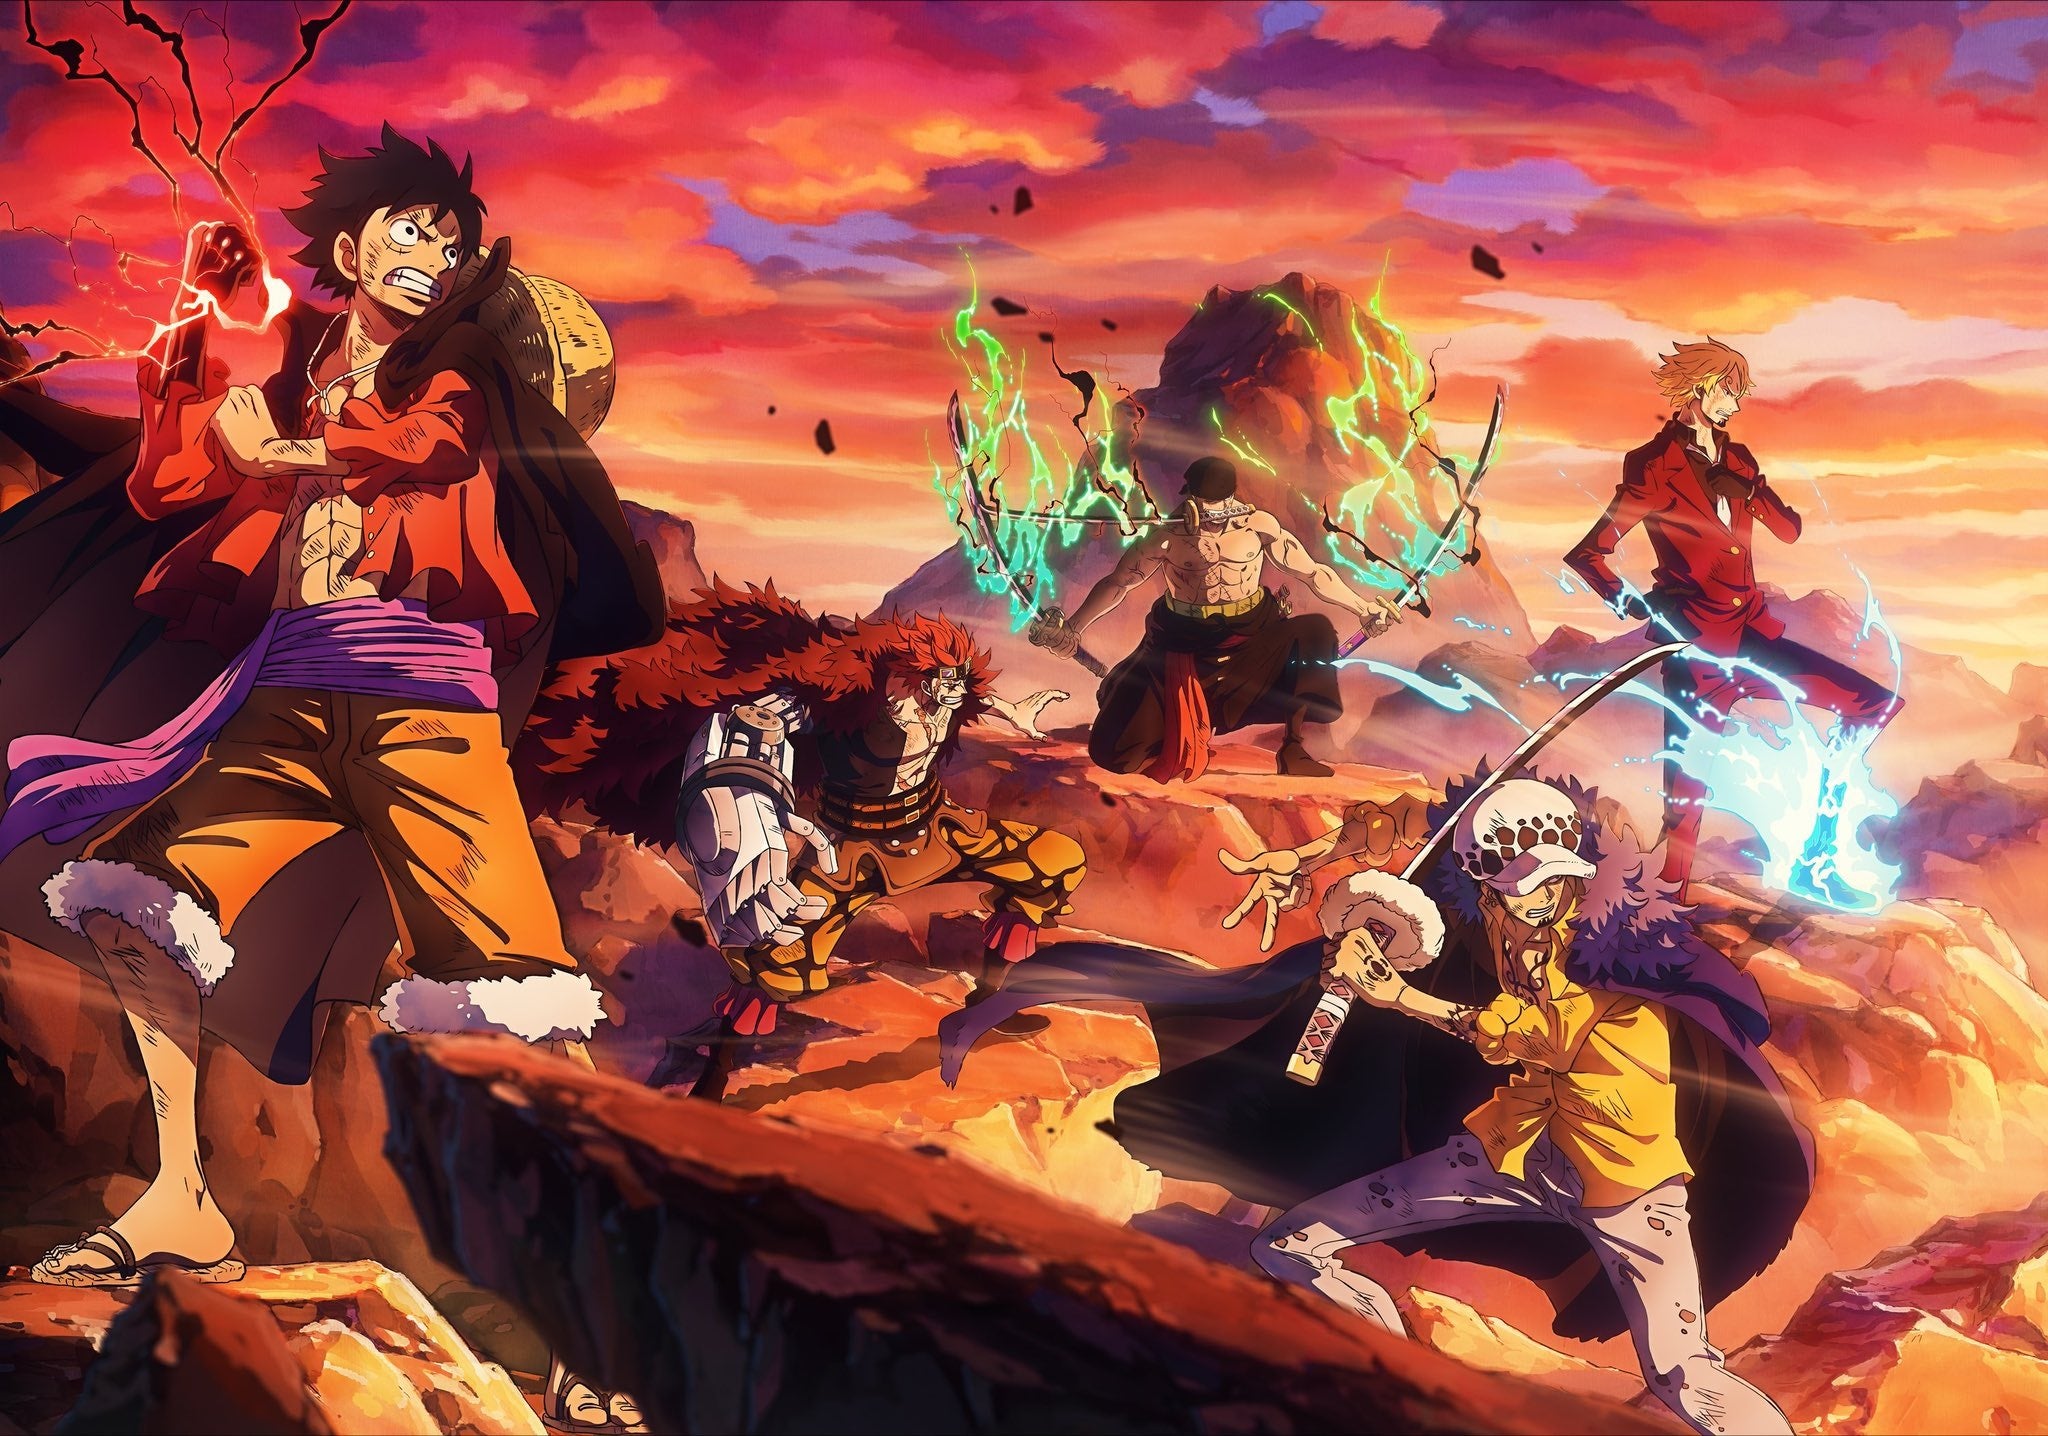 One Piece Anime Reveals Ending 19 With Song Raise by Chilli Beans, First  Ending in 17 Years - Anime Corner